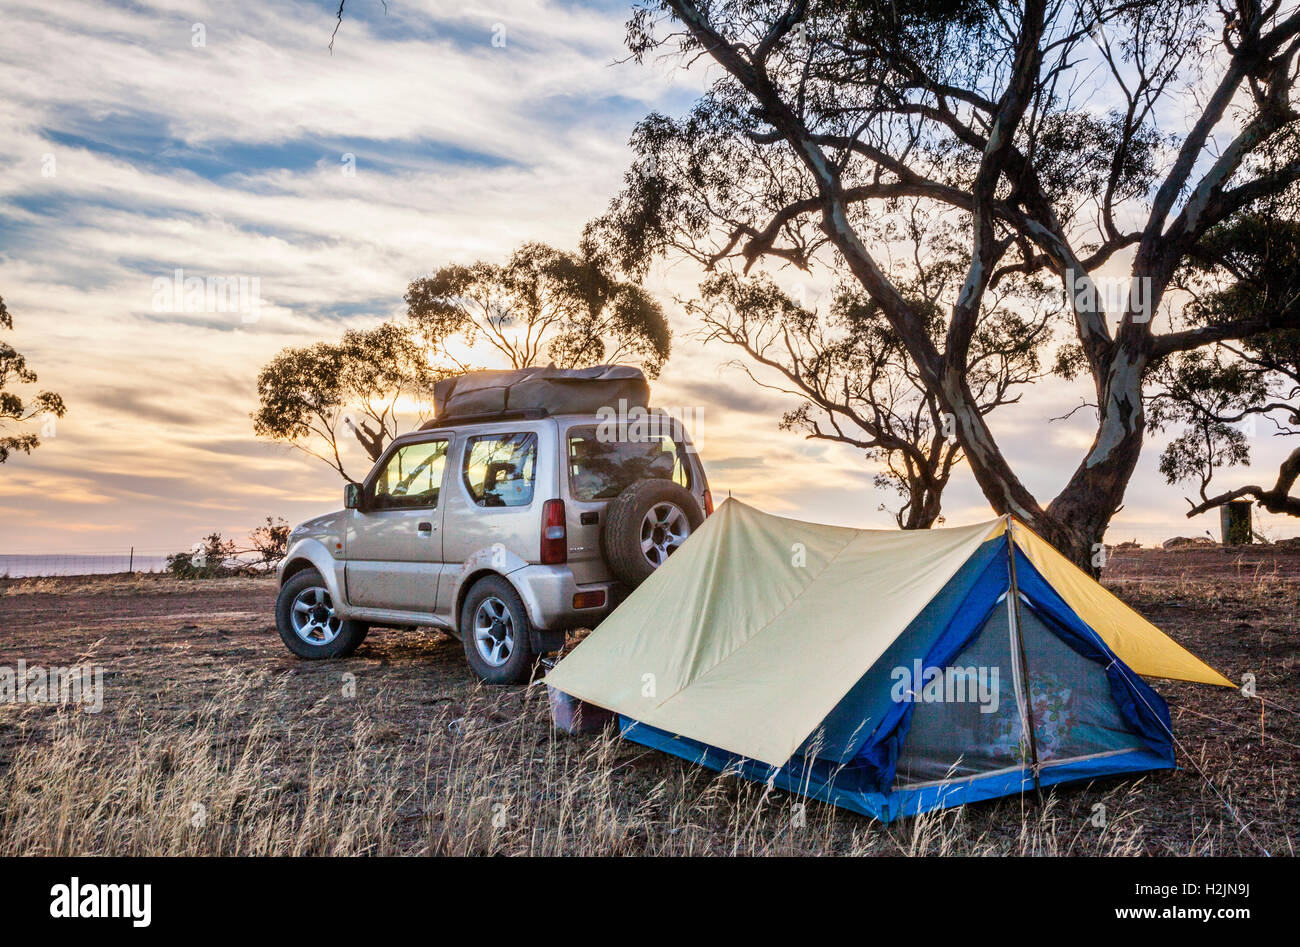 sunrise at the  Hancock's Lookout camp site at near Wilmington South Australia Stock Photo